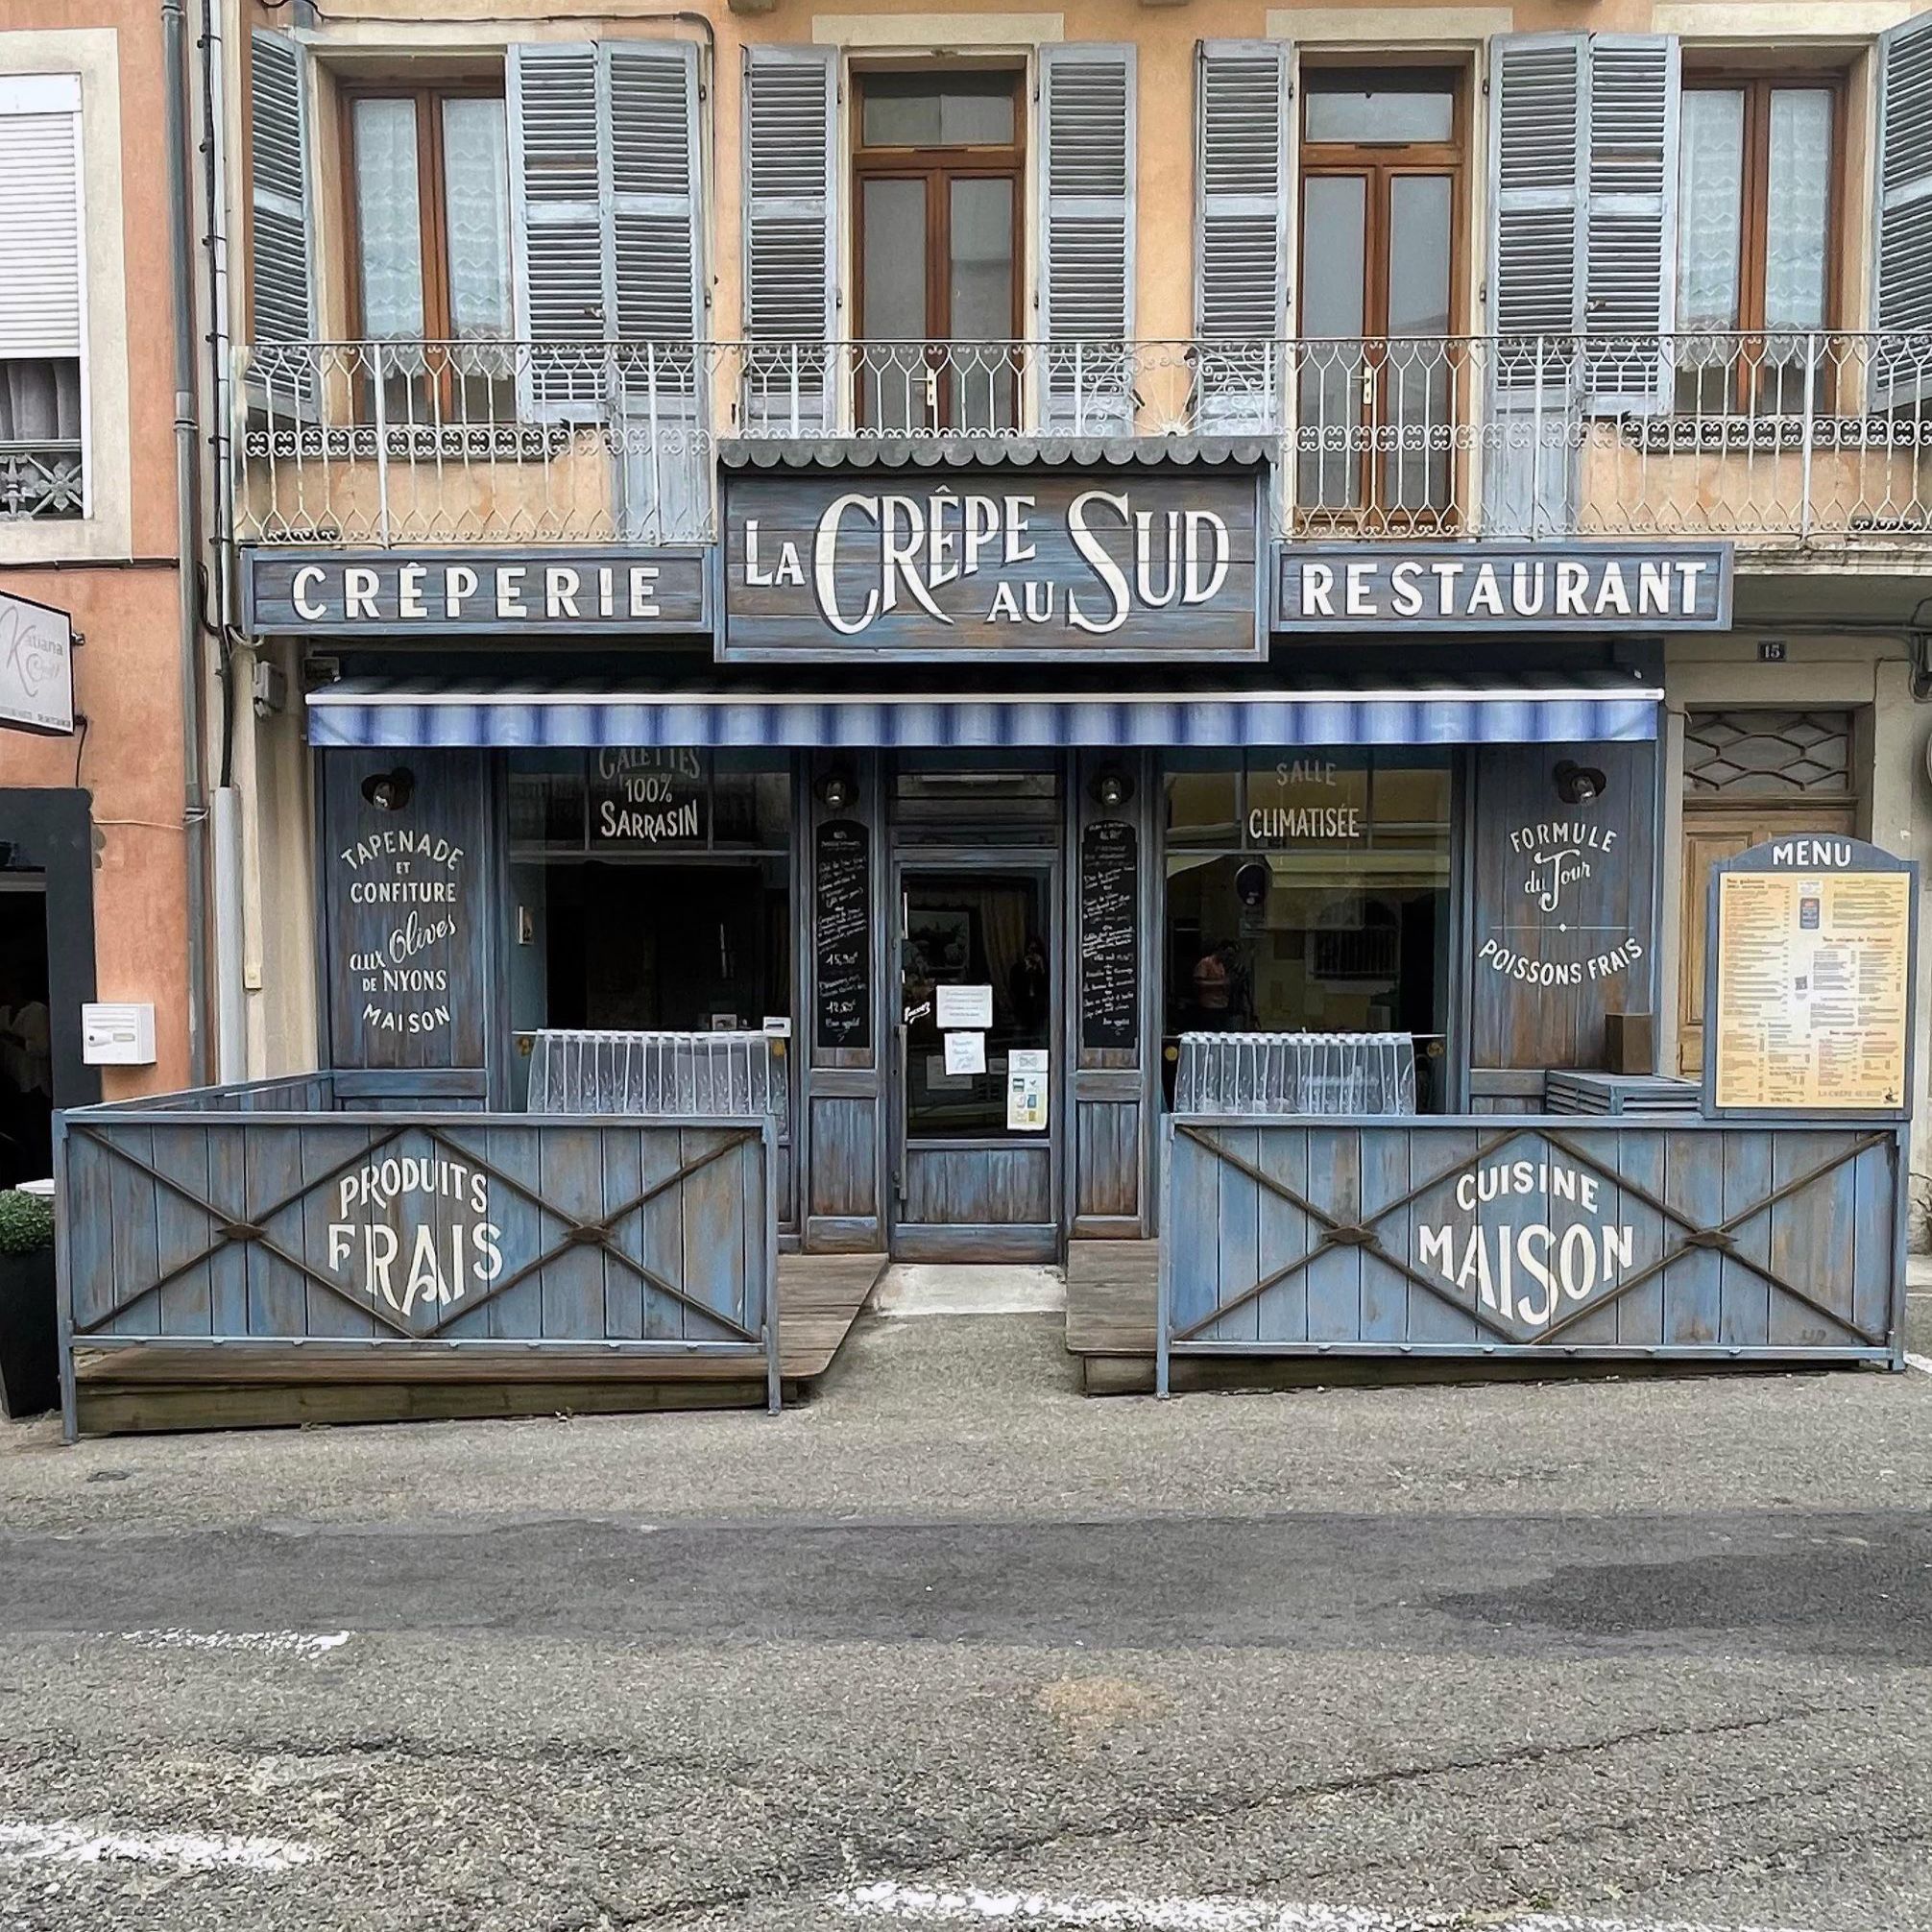 Image representing the front of the restaurant